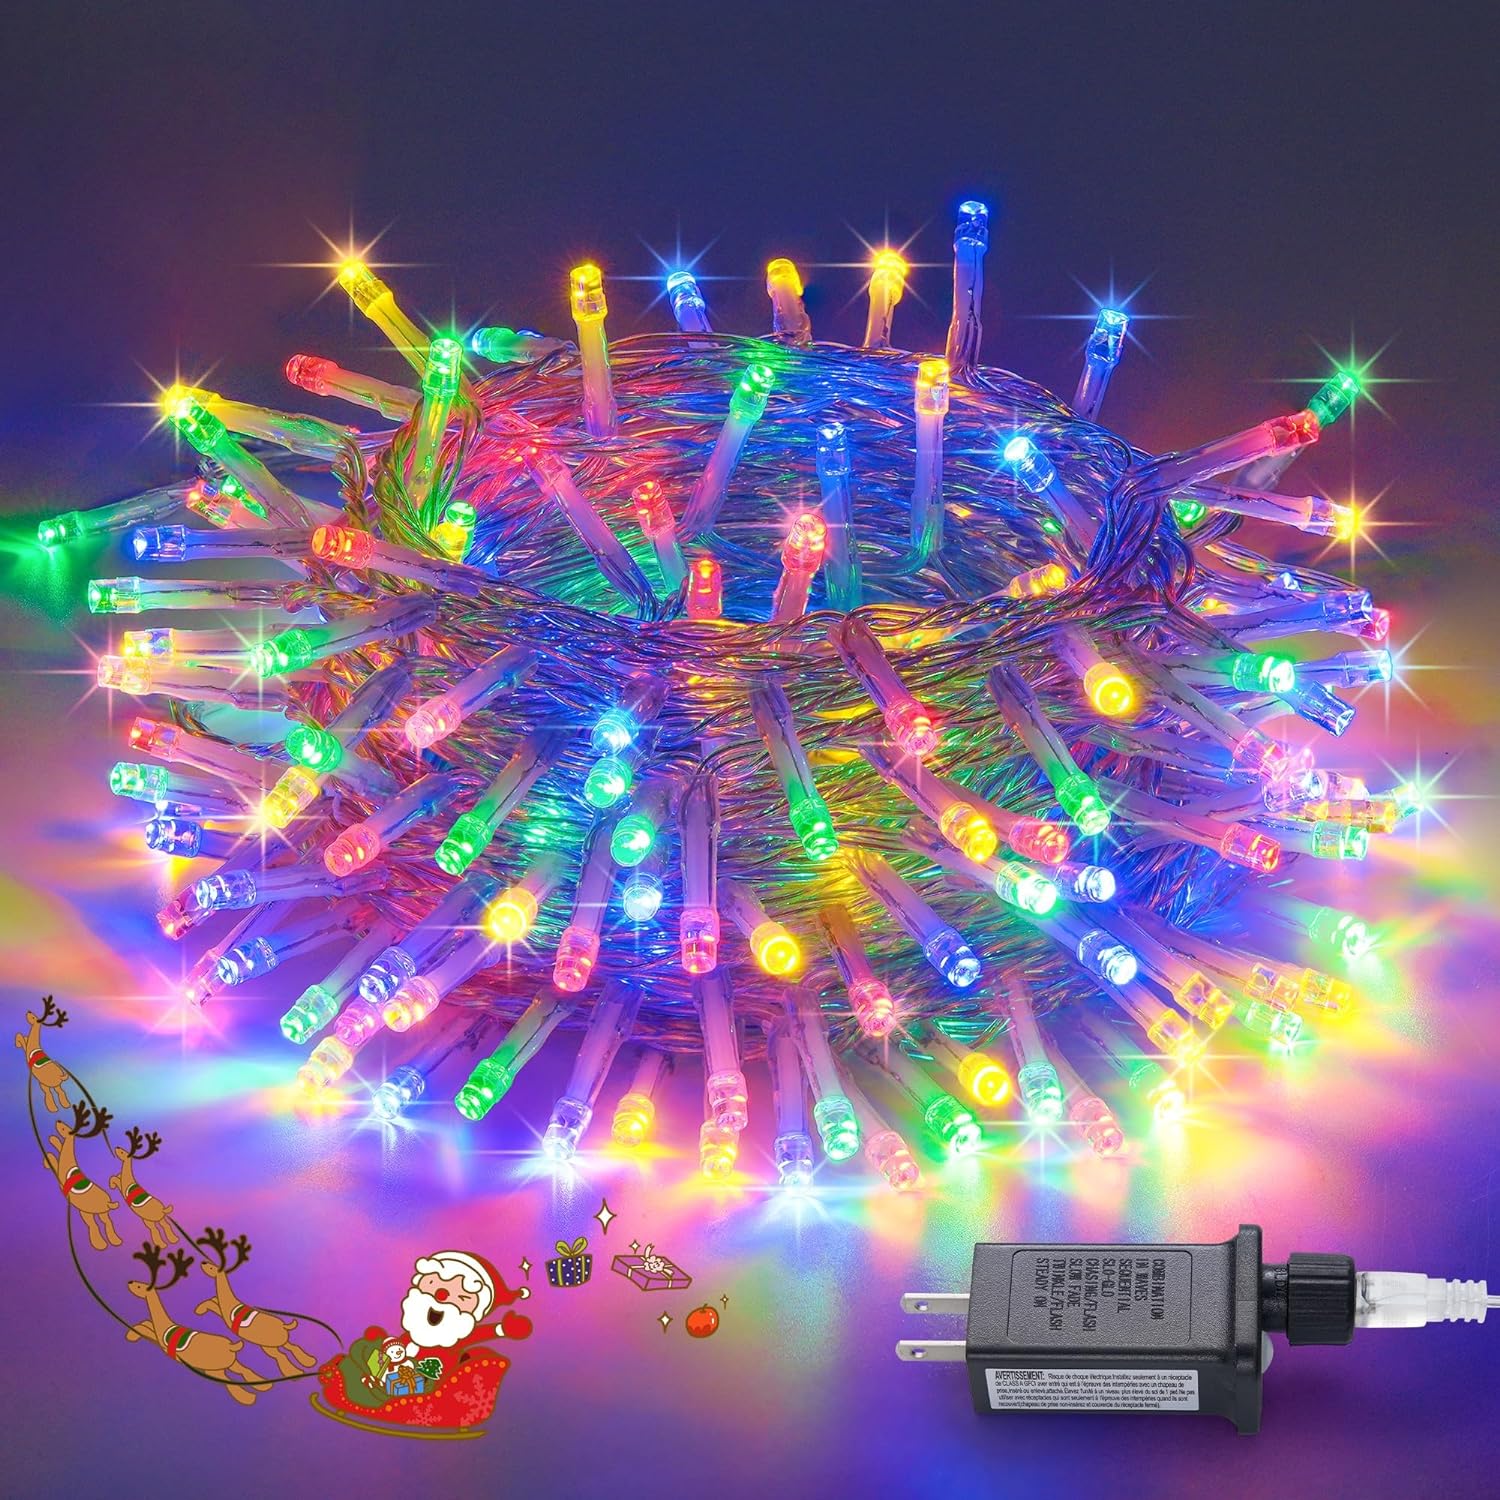 JMEXSUSS Christmas Tree Lights Multicolor Clear Wire Outdoor Indoor, 200 LED Multicolor Christmas Lights, 66ft Colorful Christmas Lights Plug in for Christmas Bedroom Tree Room Party Xmas Decorations